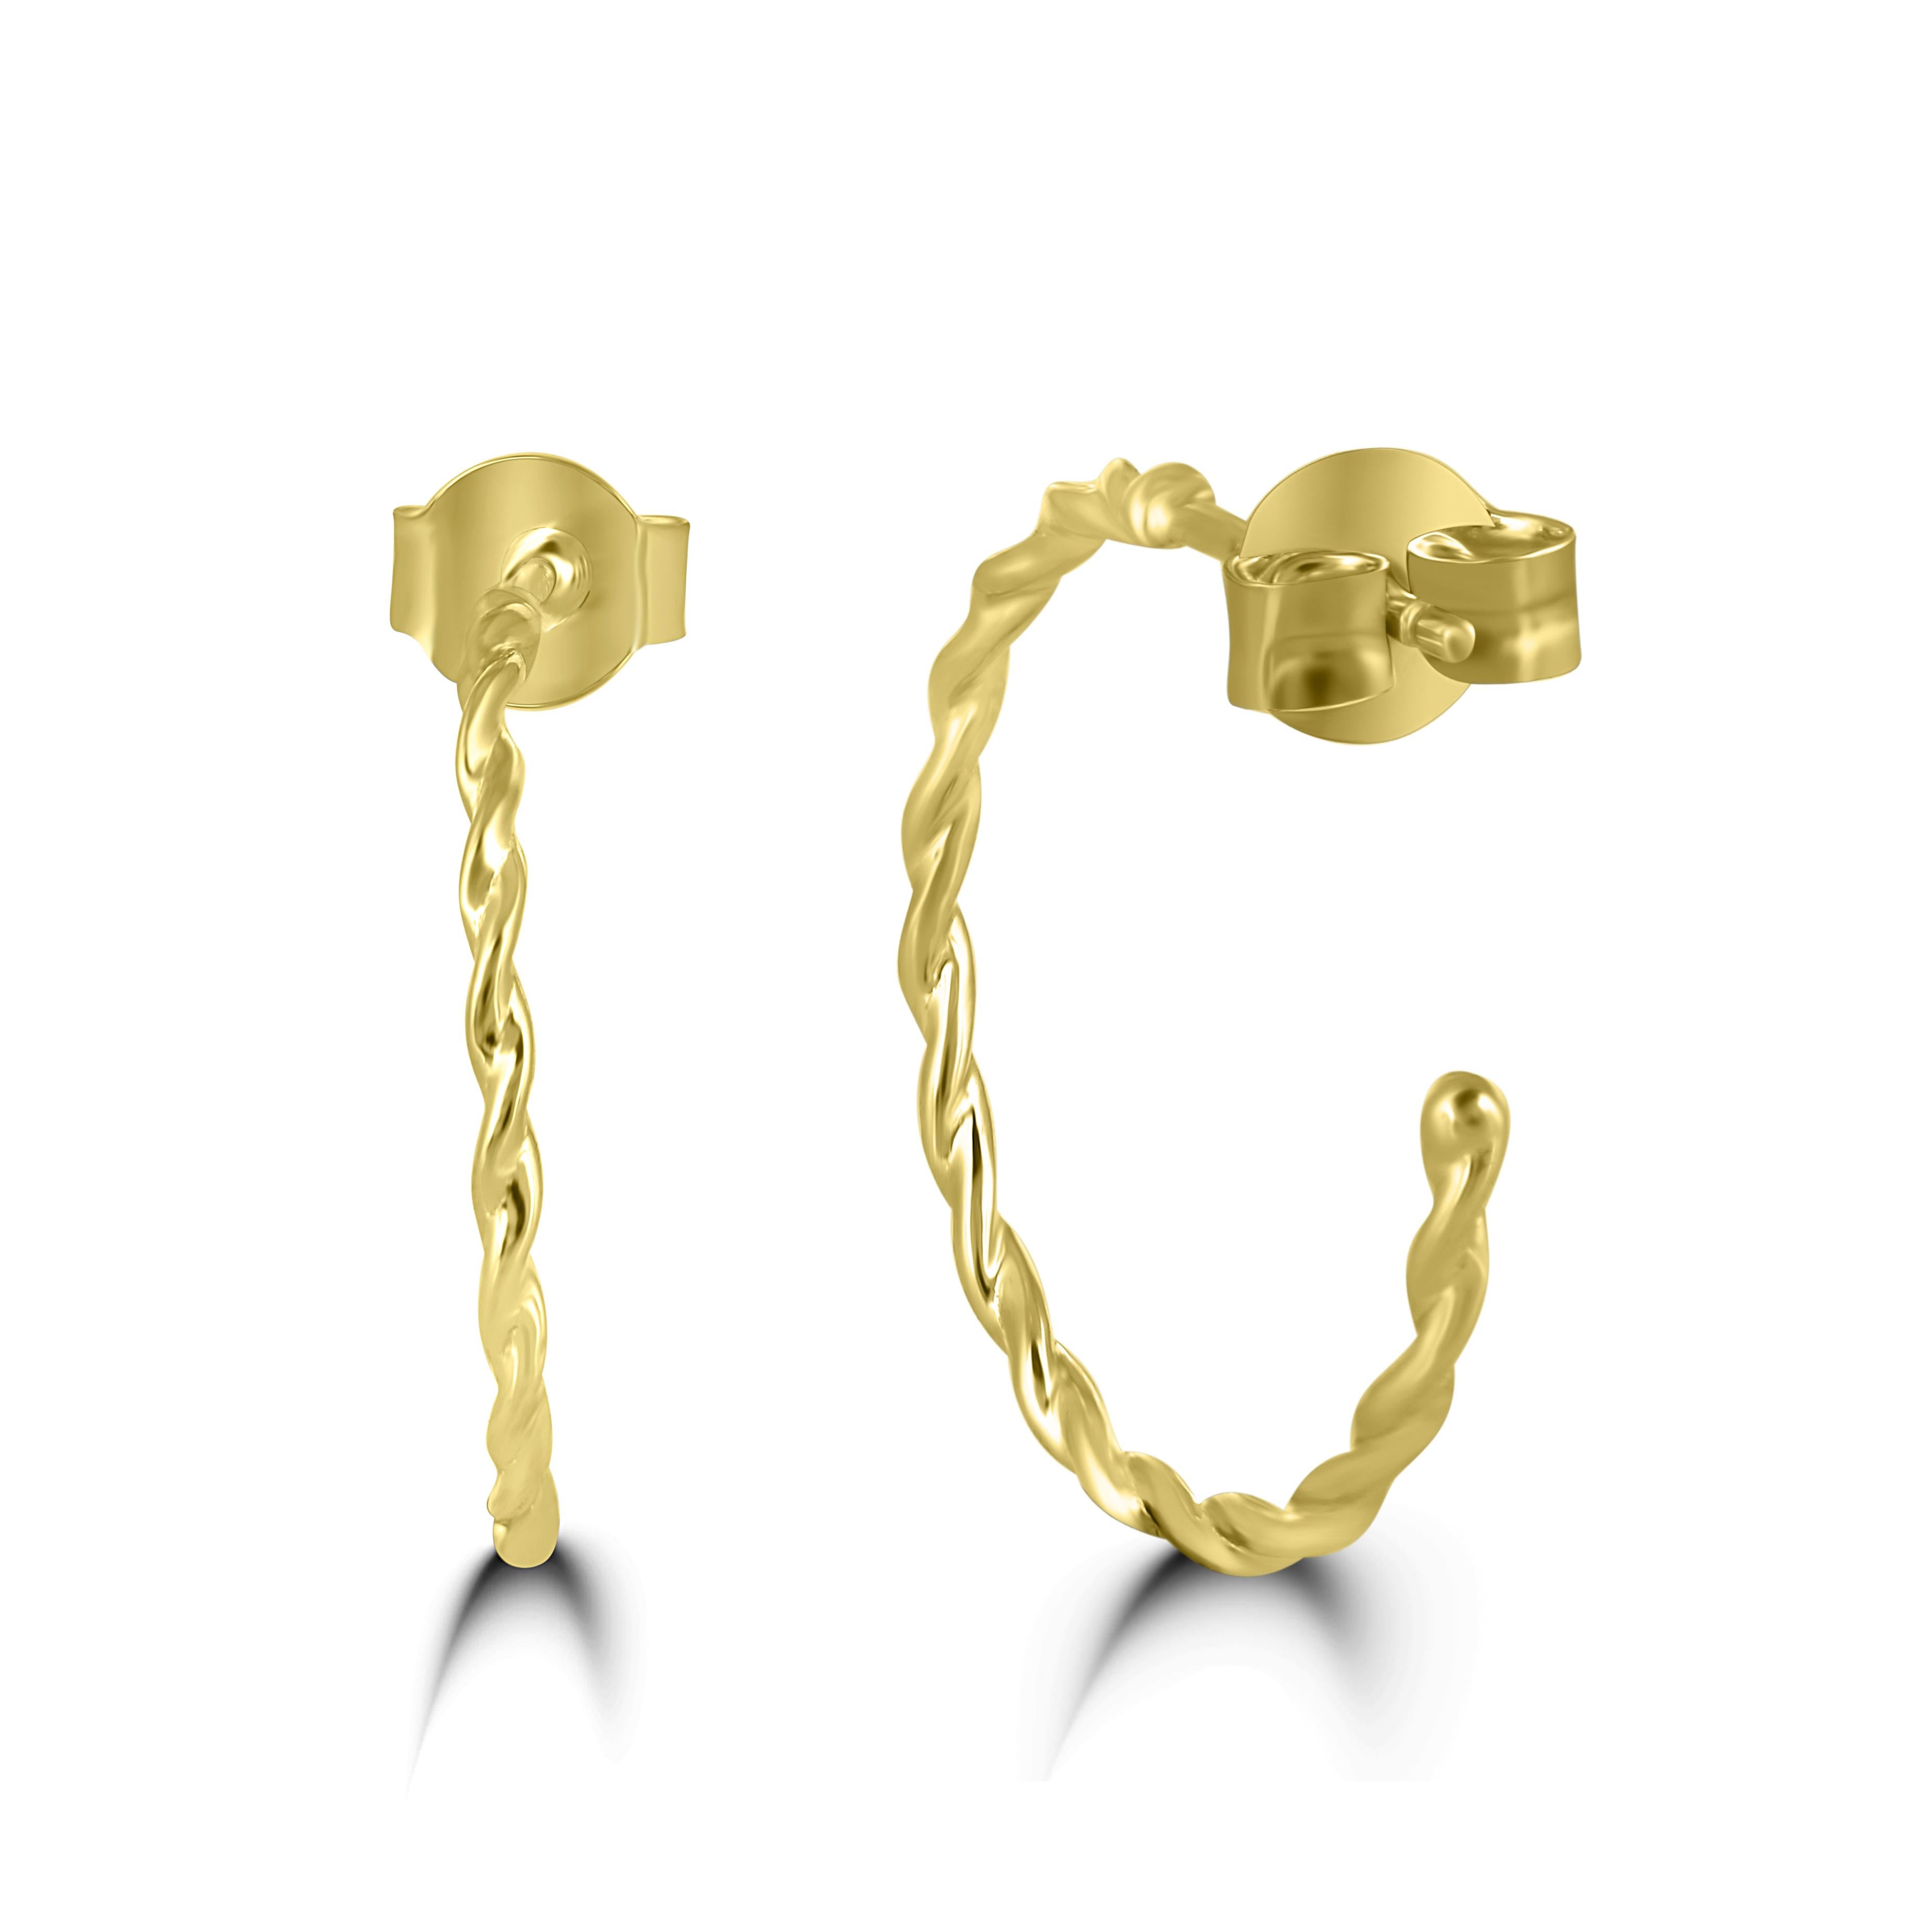 The post and clutch hoops of 14K Yellow Gold feature sheer trendiness. Show your imperial side by donning these stunning earrings. Twisted like a braid, and looking like a hoop, this Luxle earring pair is a statement piece that goes with almost any